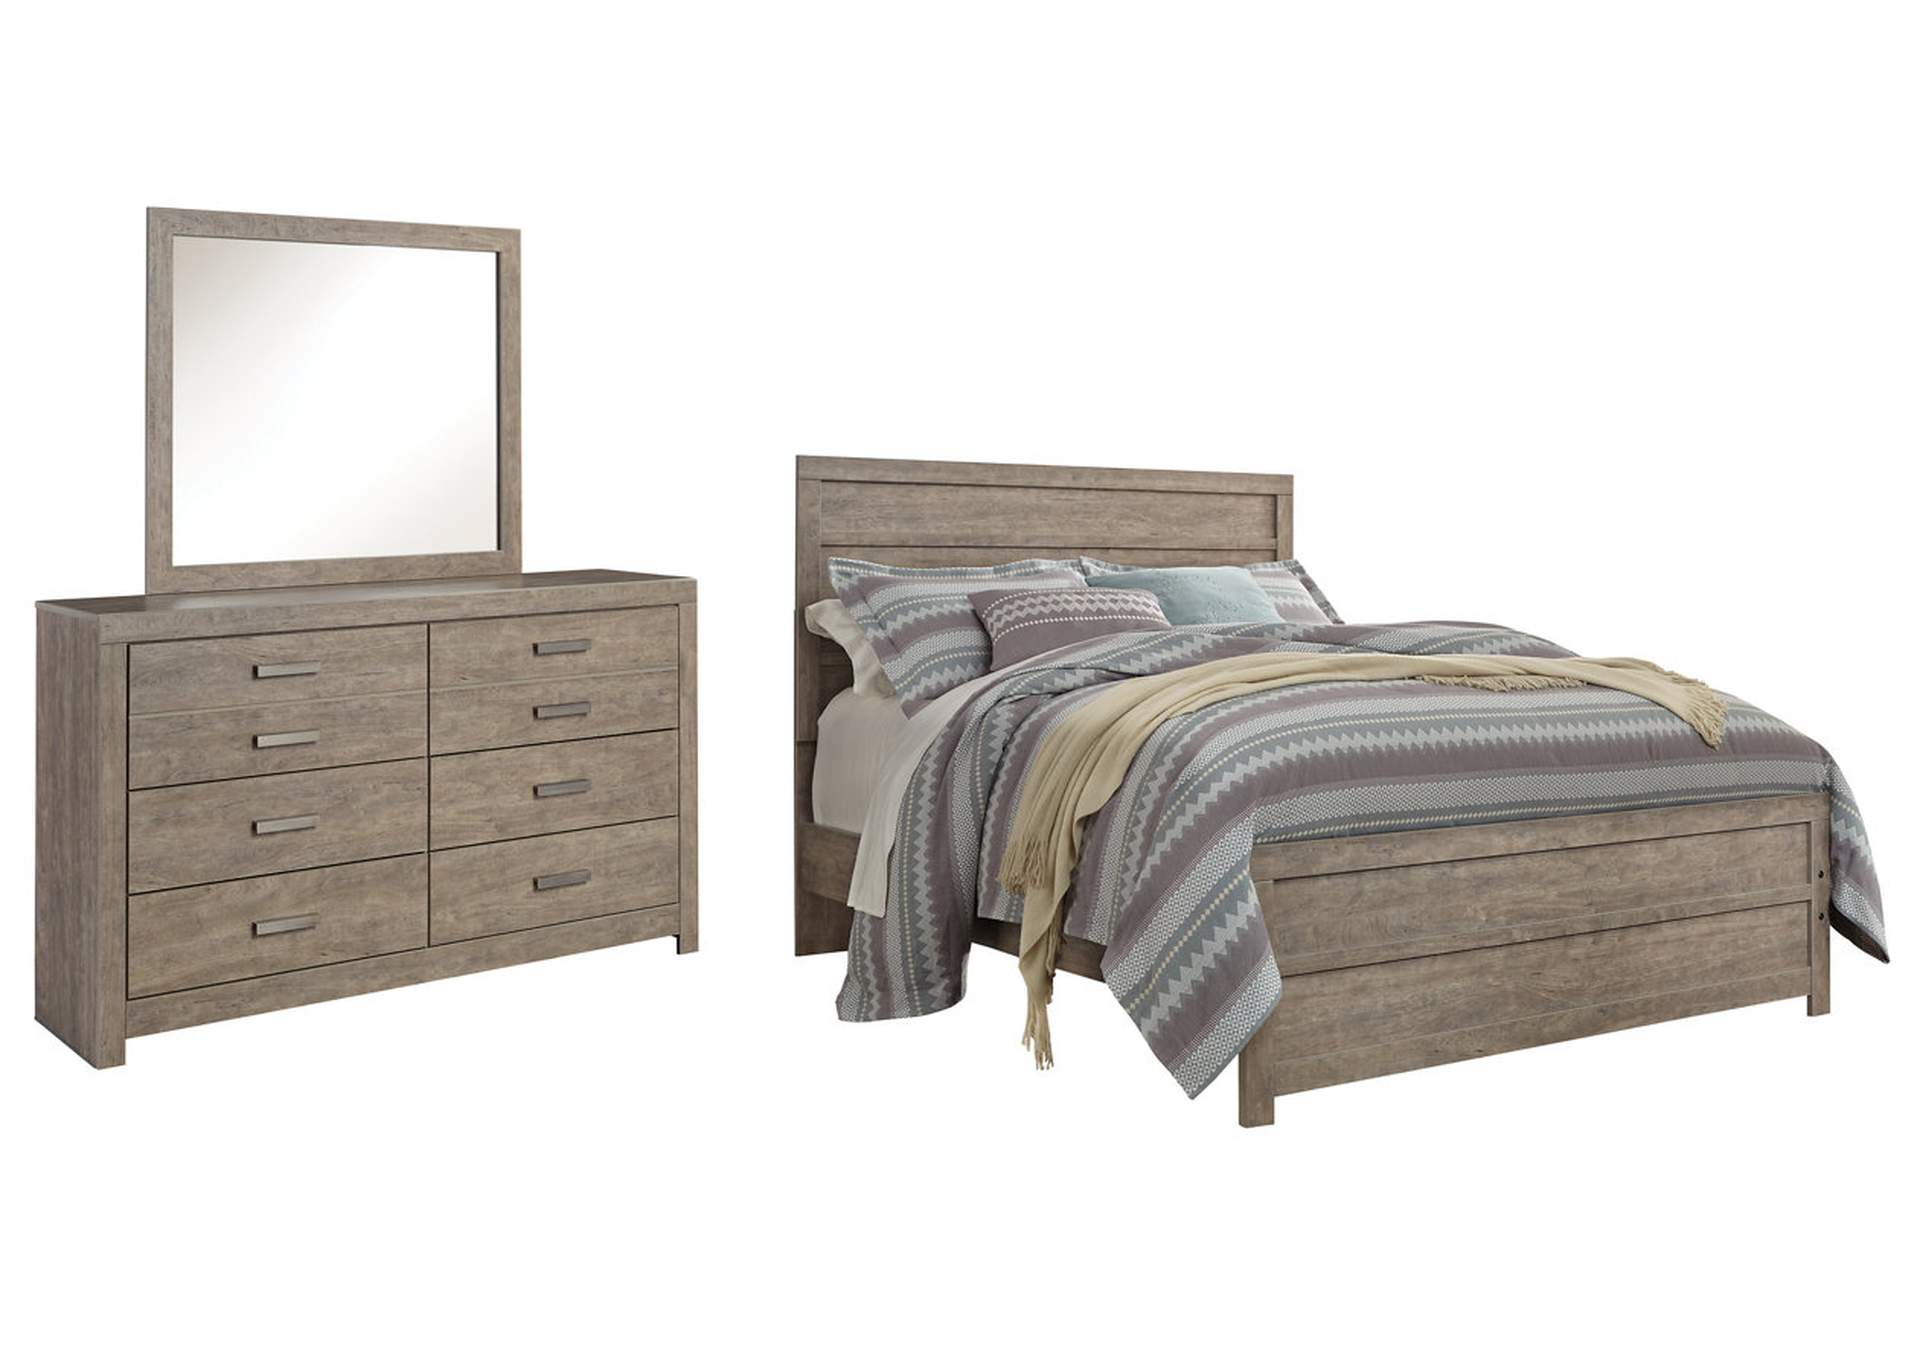 Culverbach Queen Panel Bed, Dresser and Mirror,Signature Design By Ashley